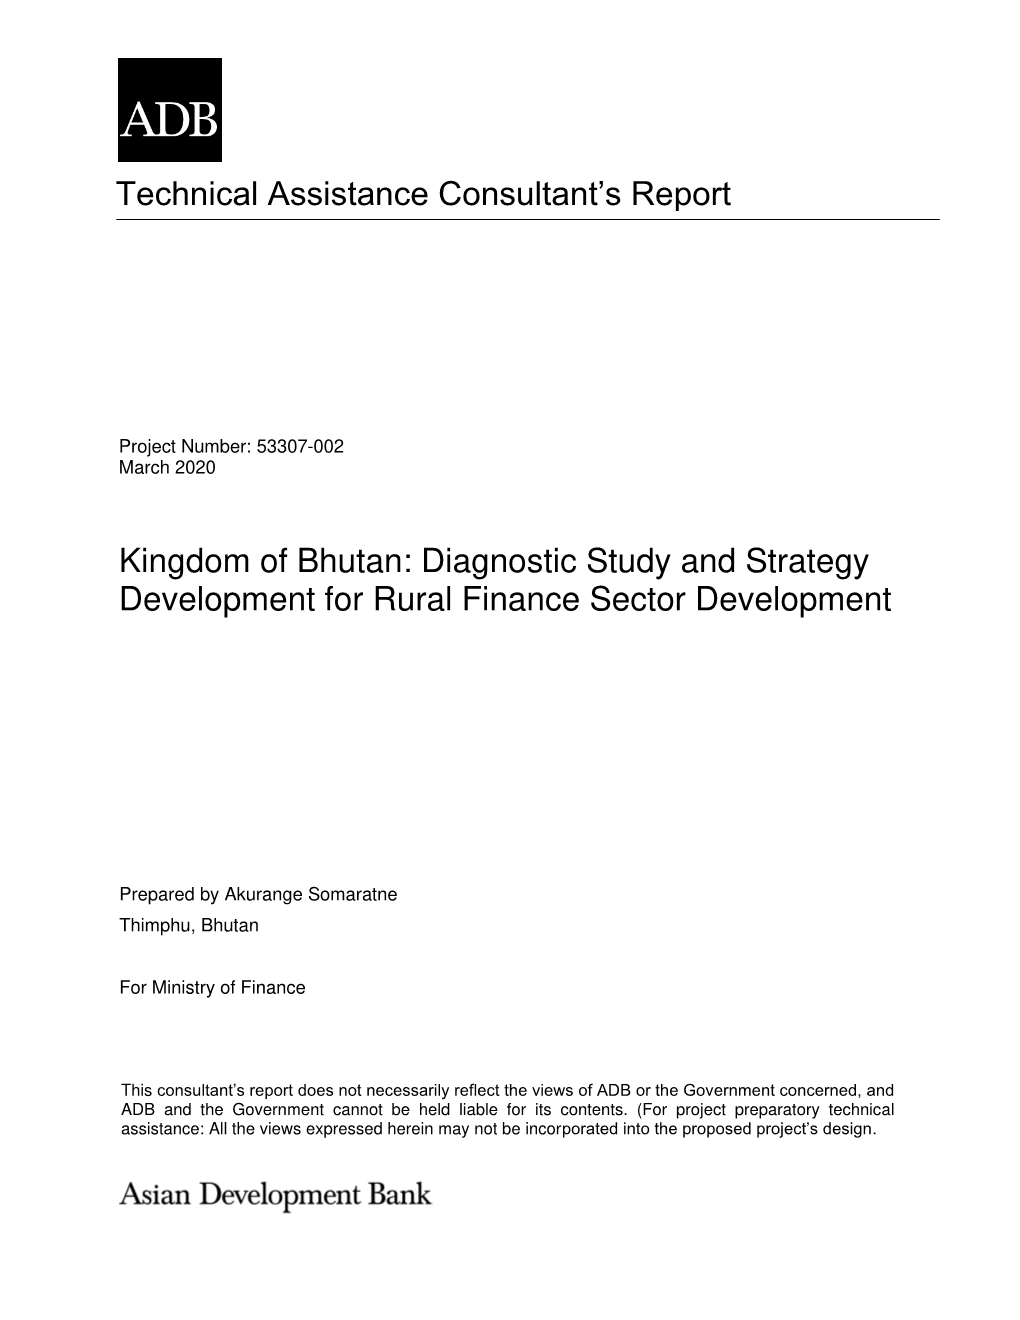 53307-002: Diagnostic Study and Strategy Development for Rural Finance Sector